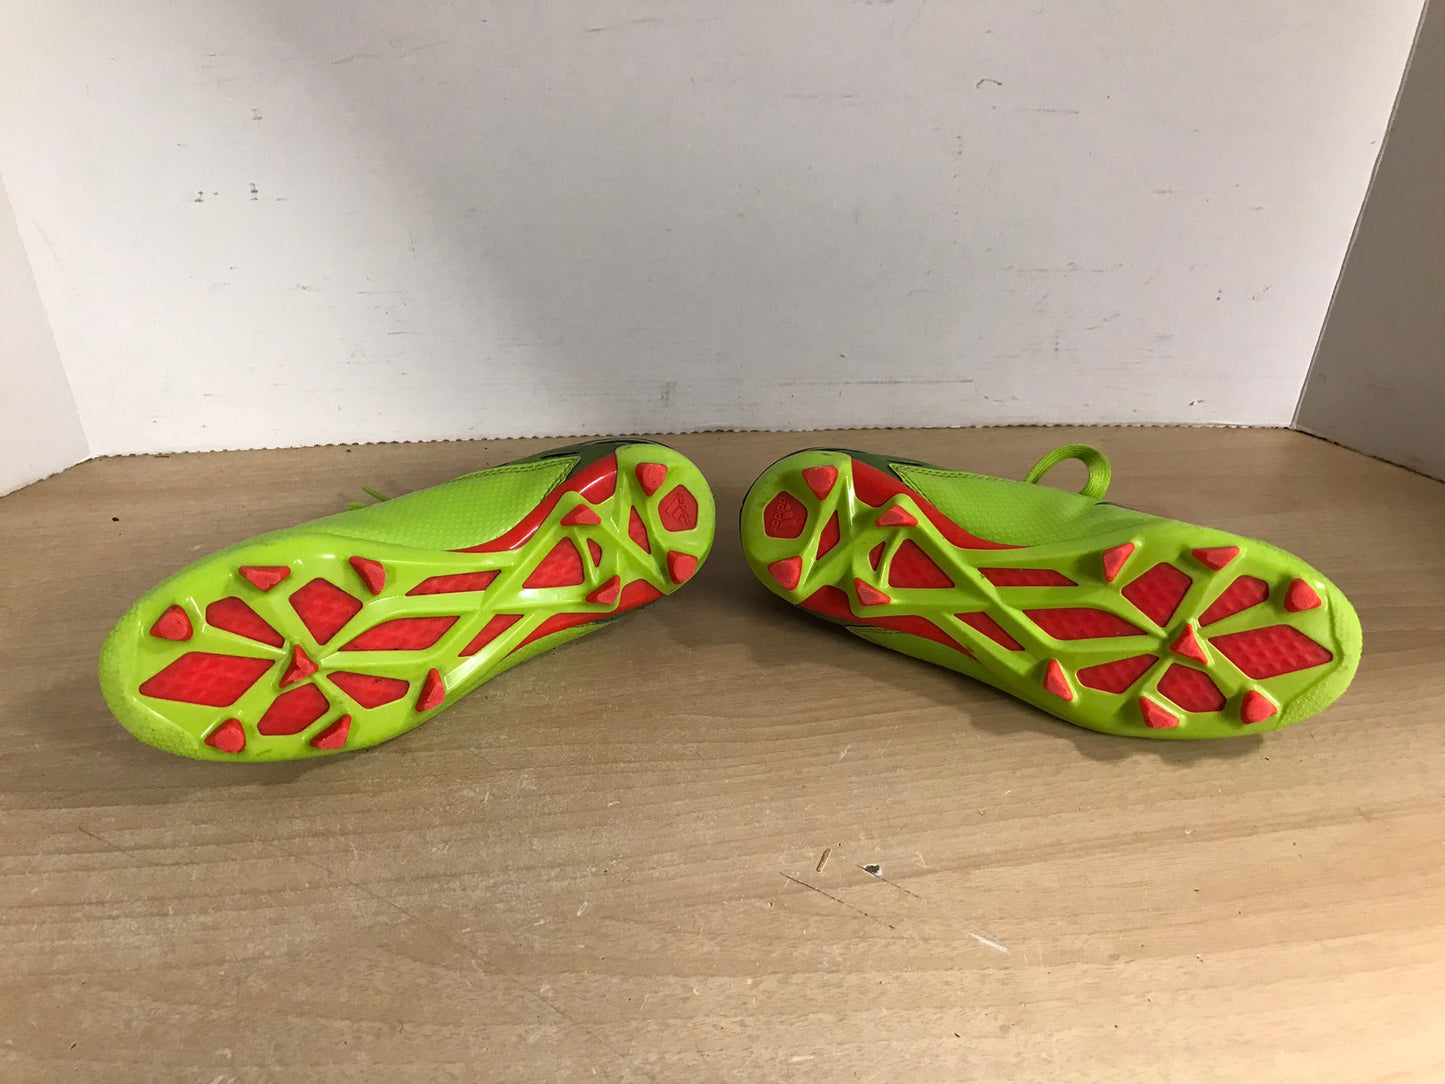 Soccer Shoes Cleats Child Size 3 Adidas Mesis Black Lime Red Excellent